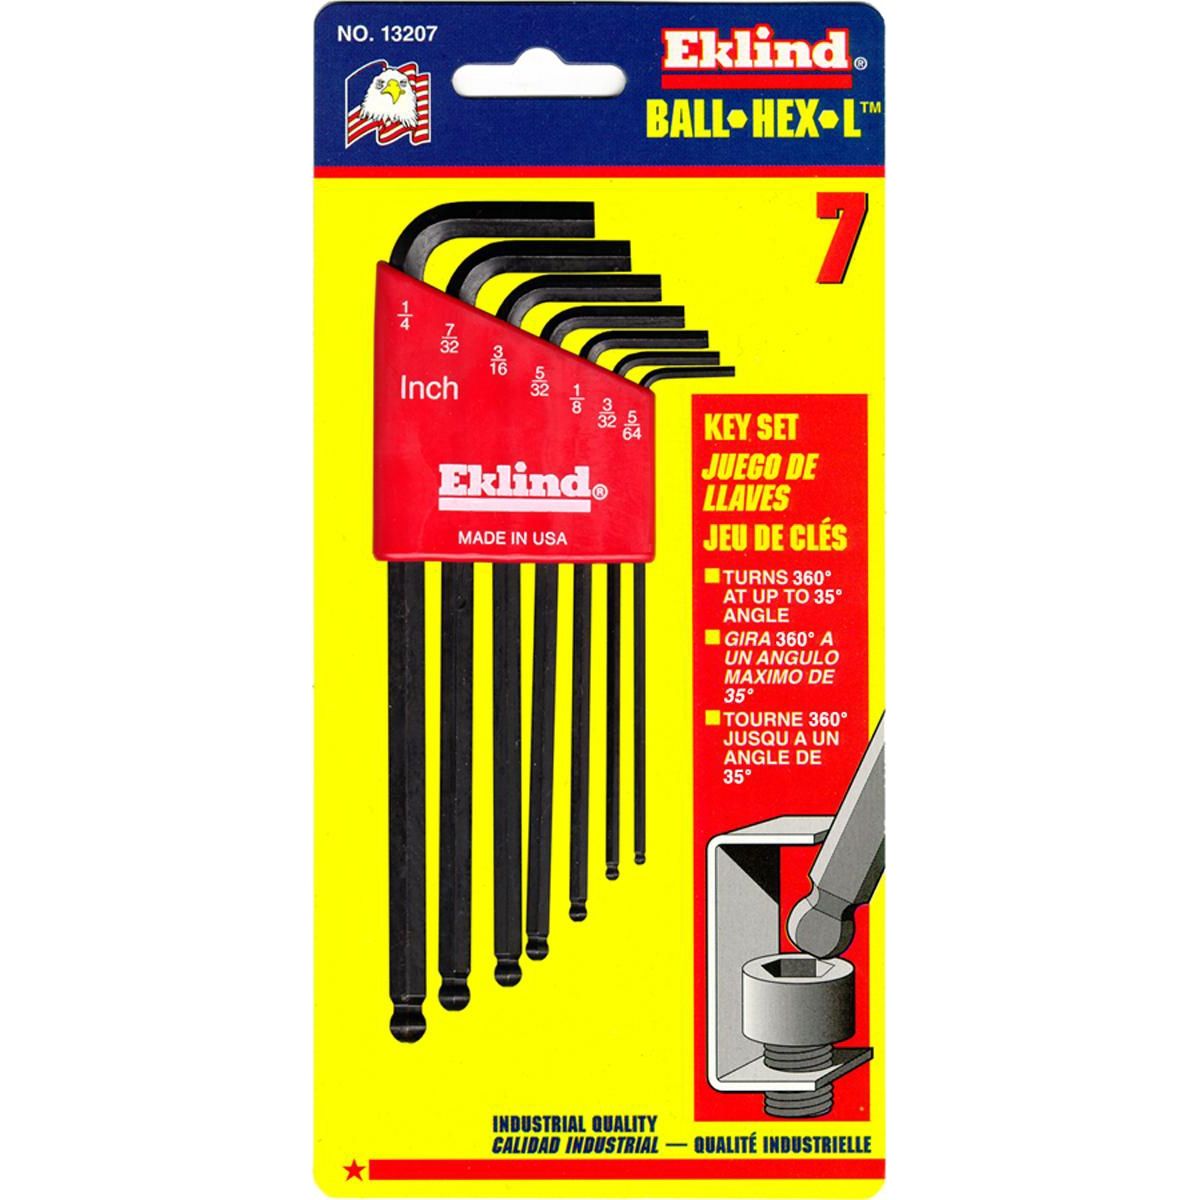 Eklind Tool Company 10222 22 Piece Combination Long Hex-L Key Set in Molded Plastic Holders 